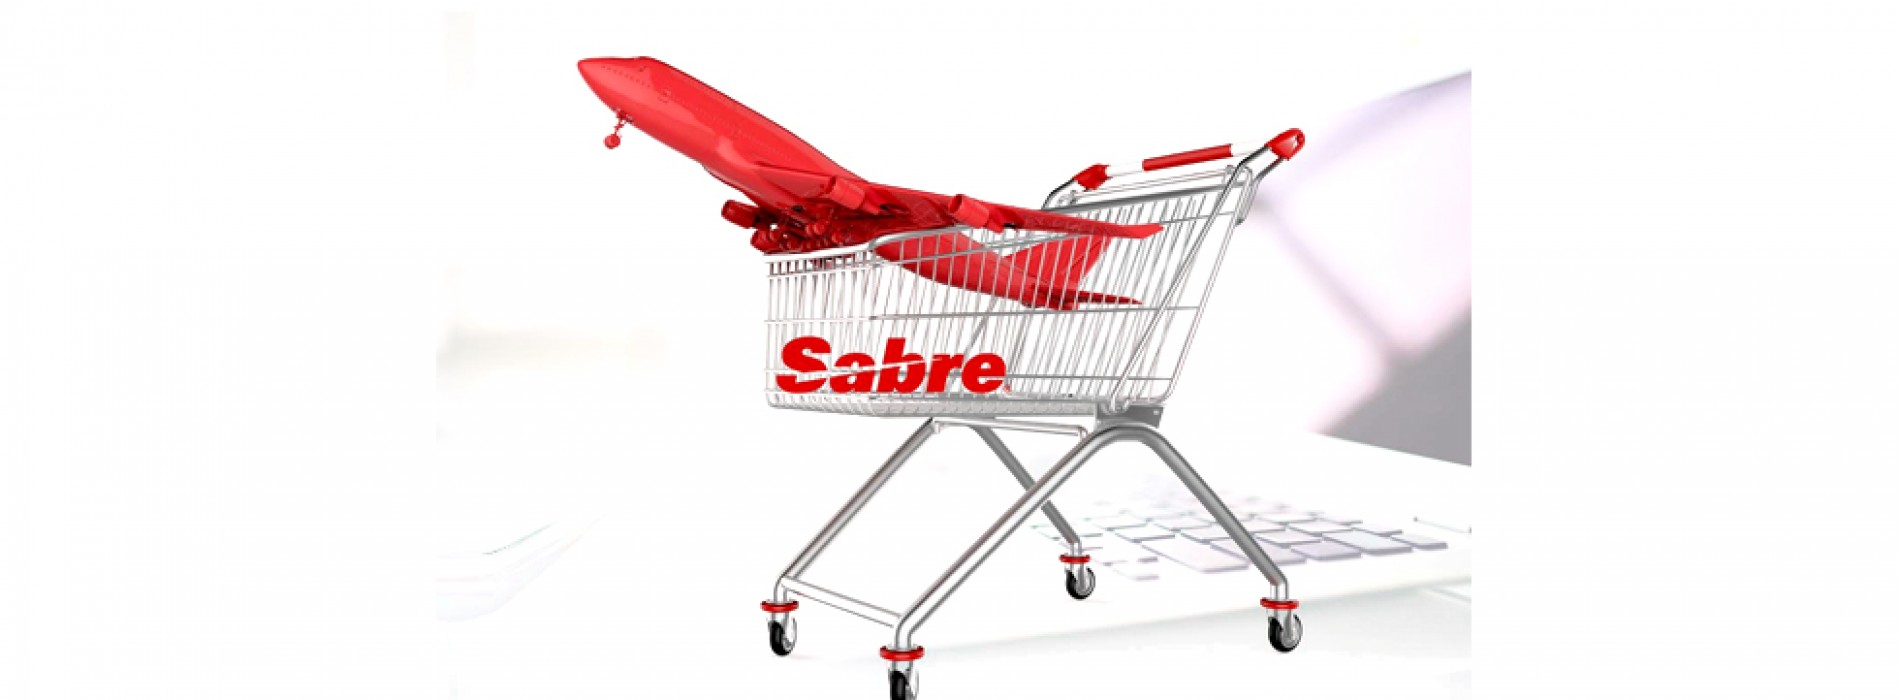 Sabre helps Emirates airline enhance traveller experience using merchandising technology